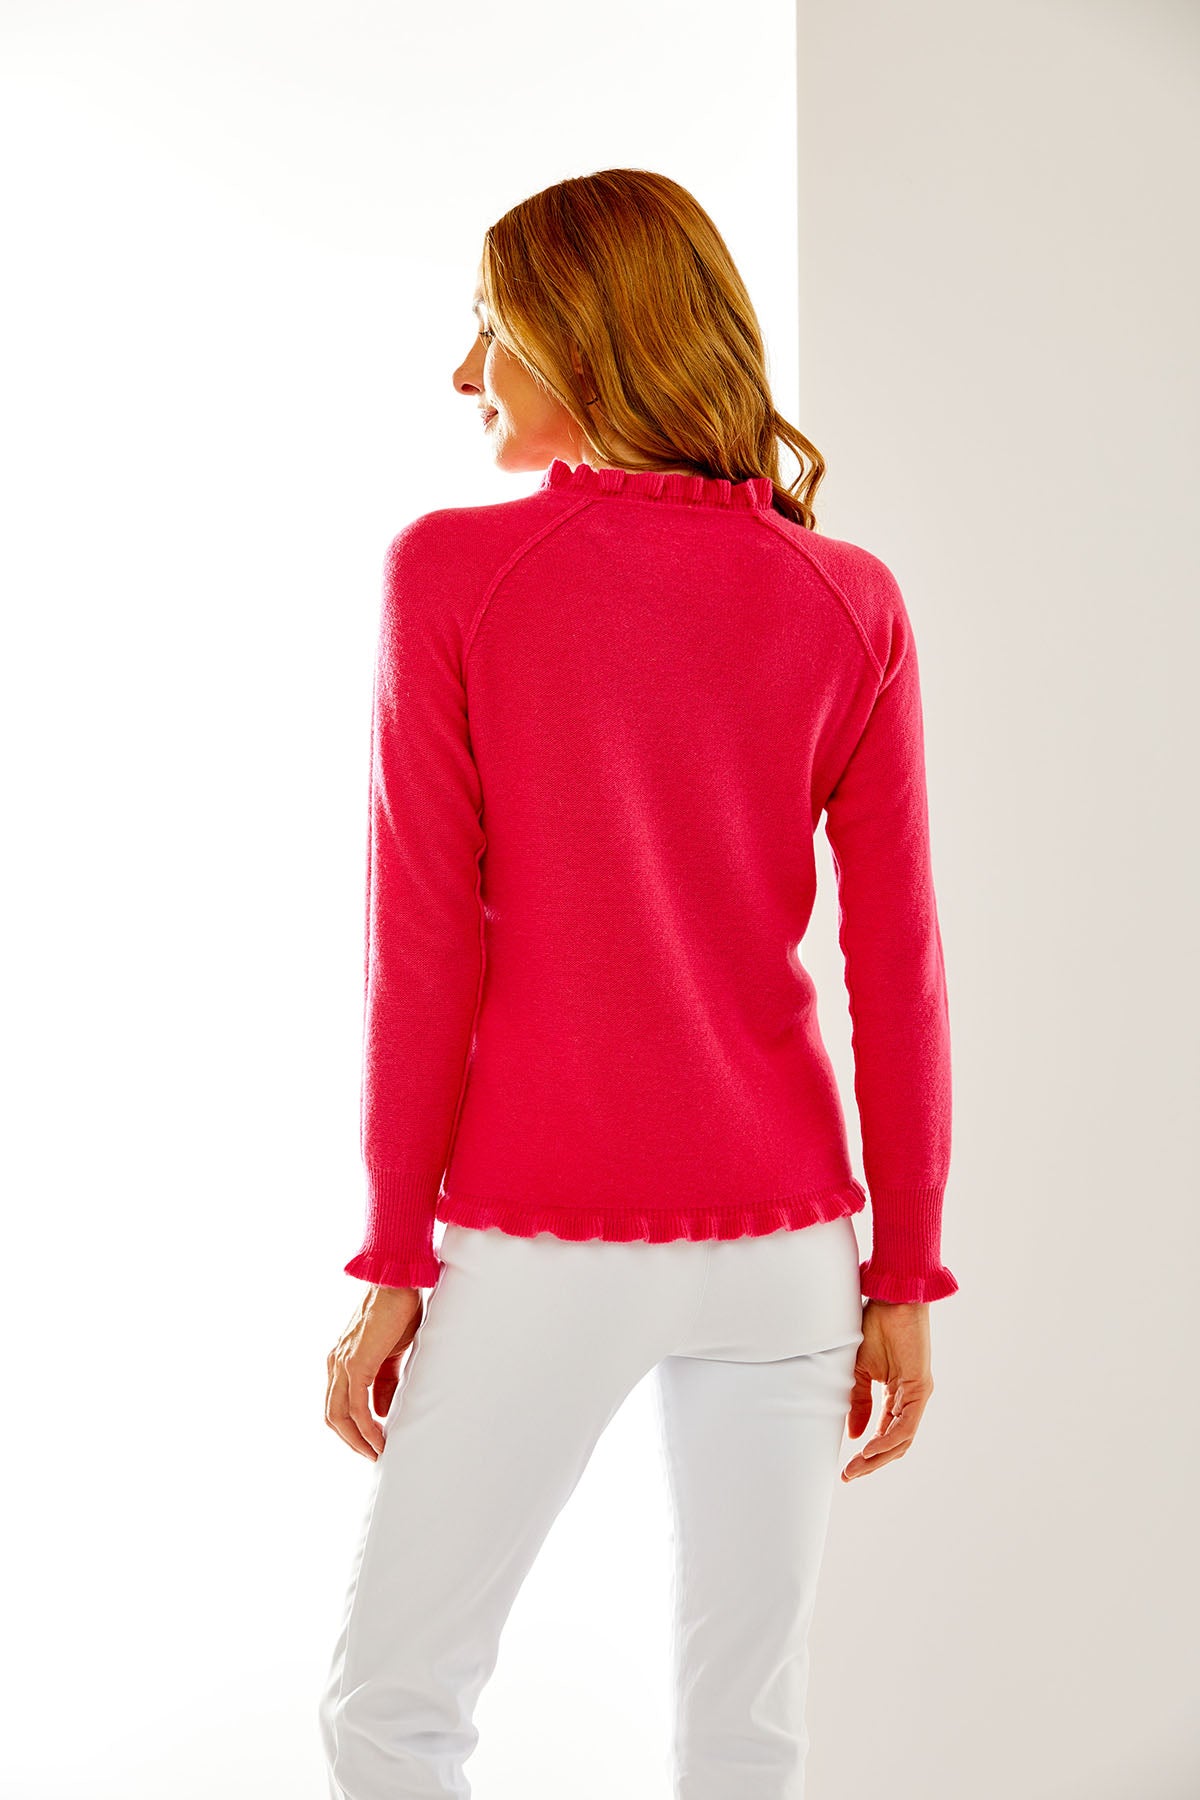 Woman in pink sweater with ruffle